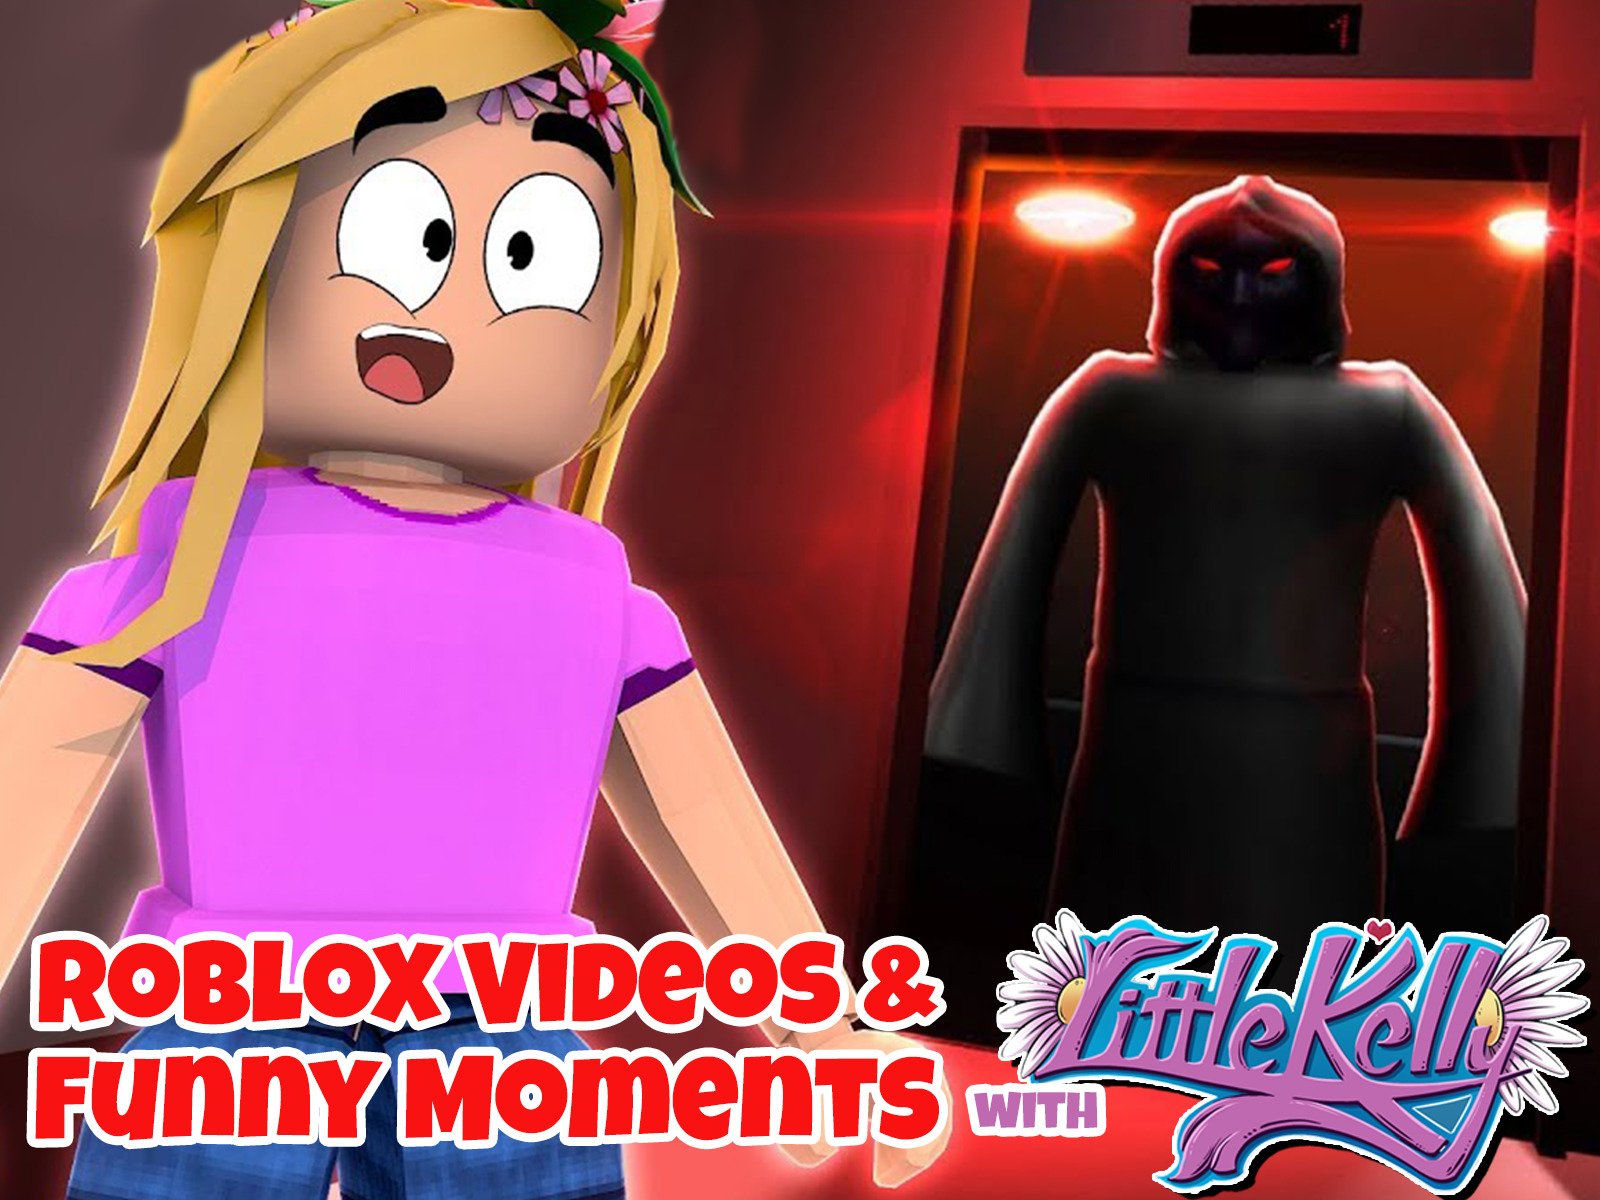 Roblox Videos And Funny Moments With Little Kelly On - Cartoon - HD Wallpaper 